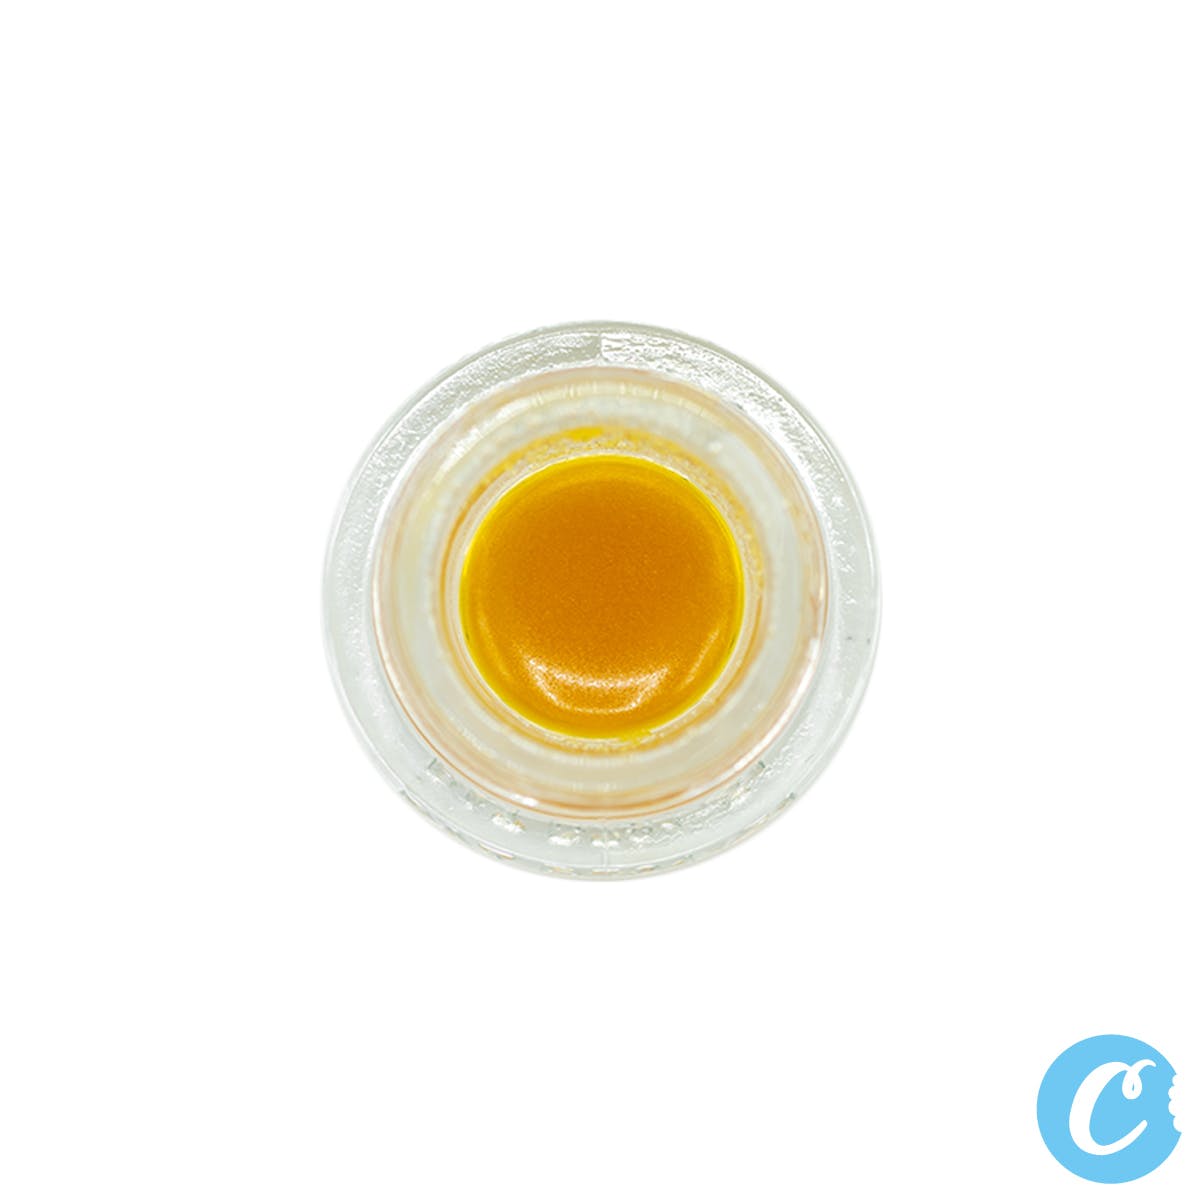 FIELD EXTRACTS SAUCE - Zmoothie #1